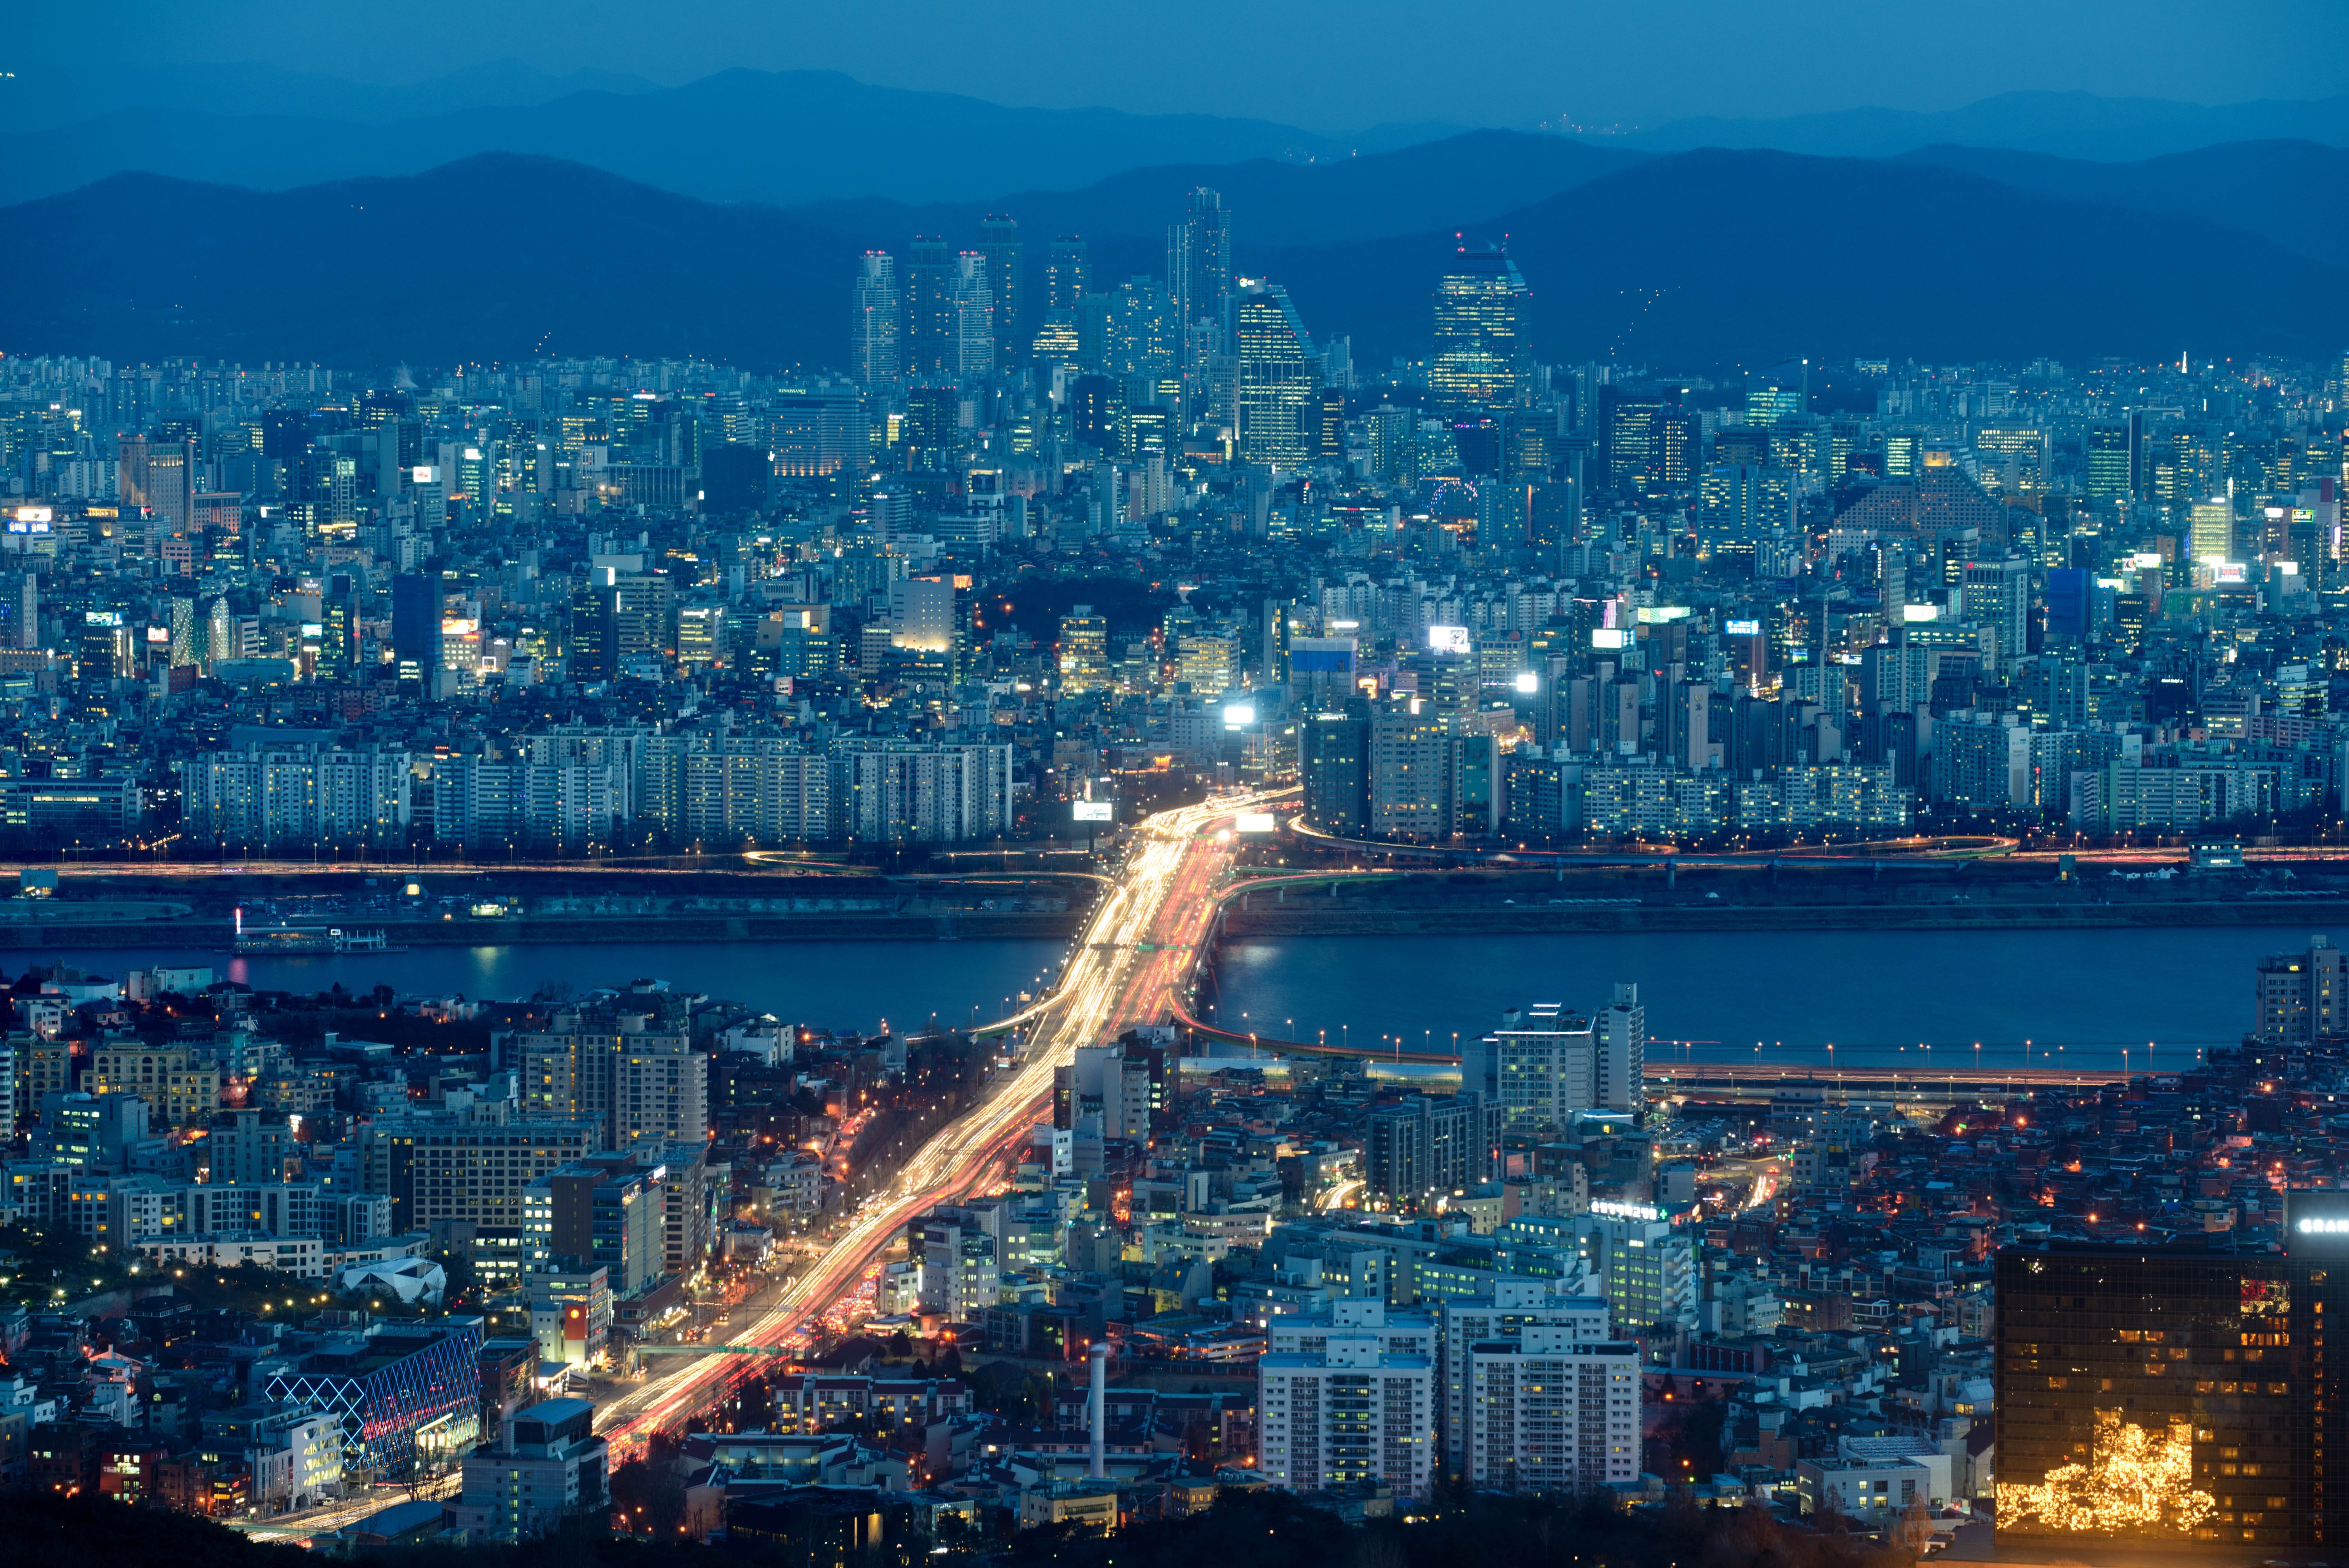 10 things to see in Seoul, South Korea | CNN Travel